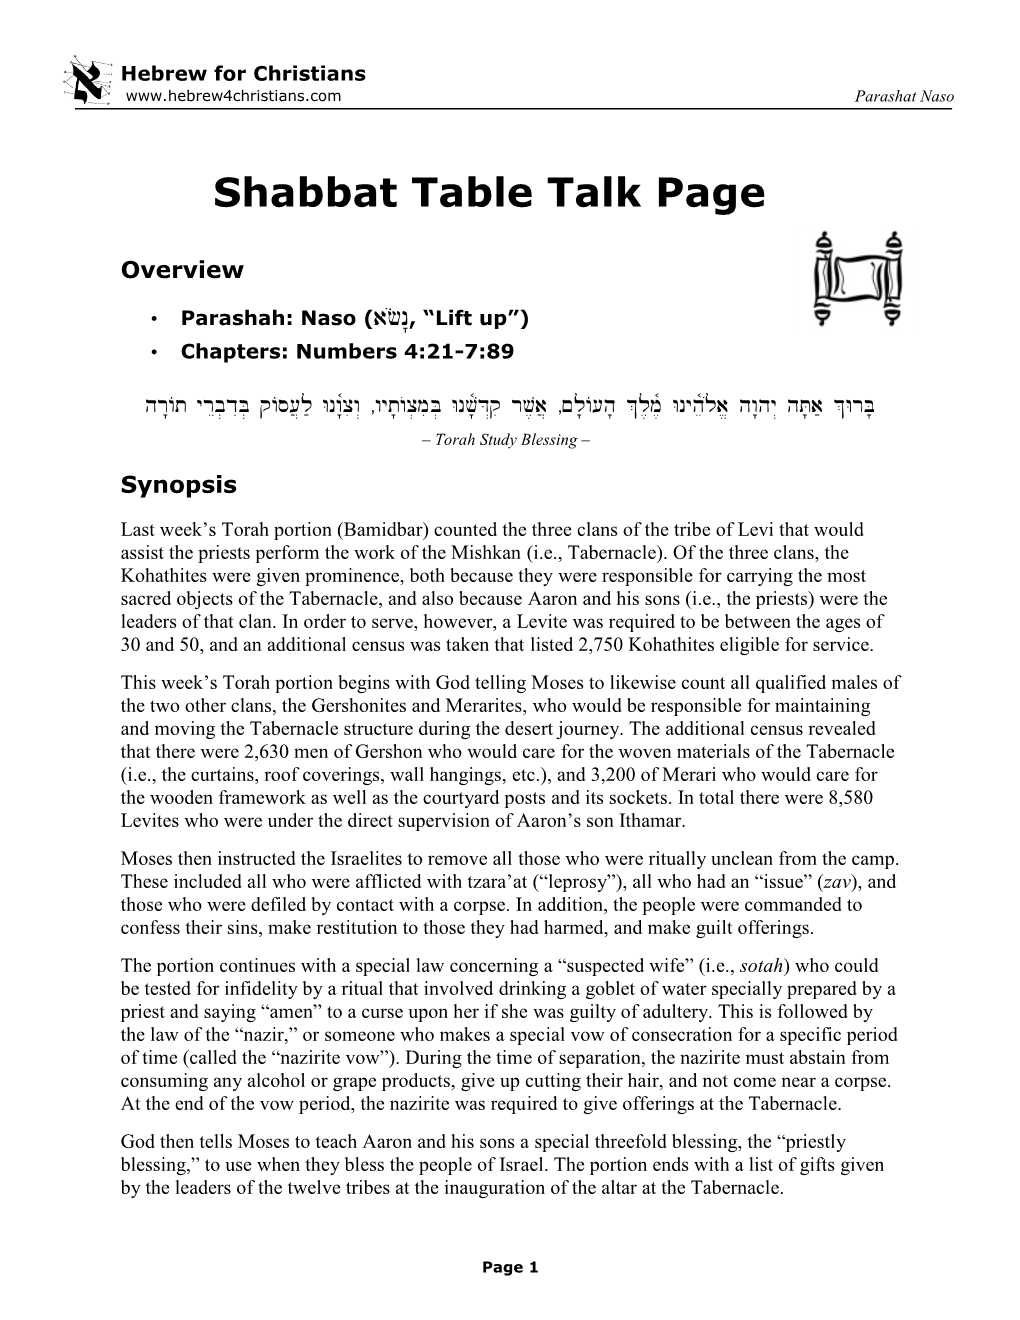 Table Talk Page